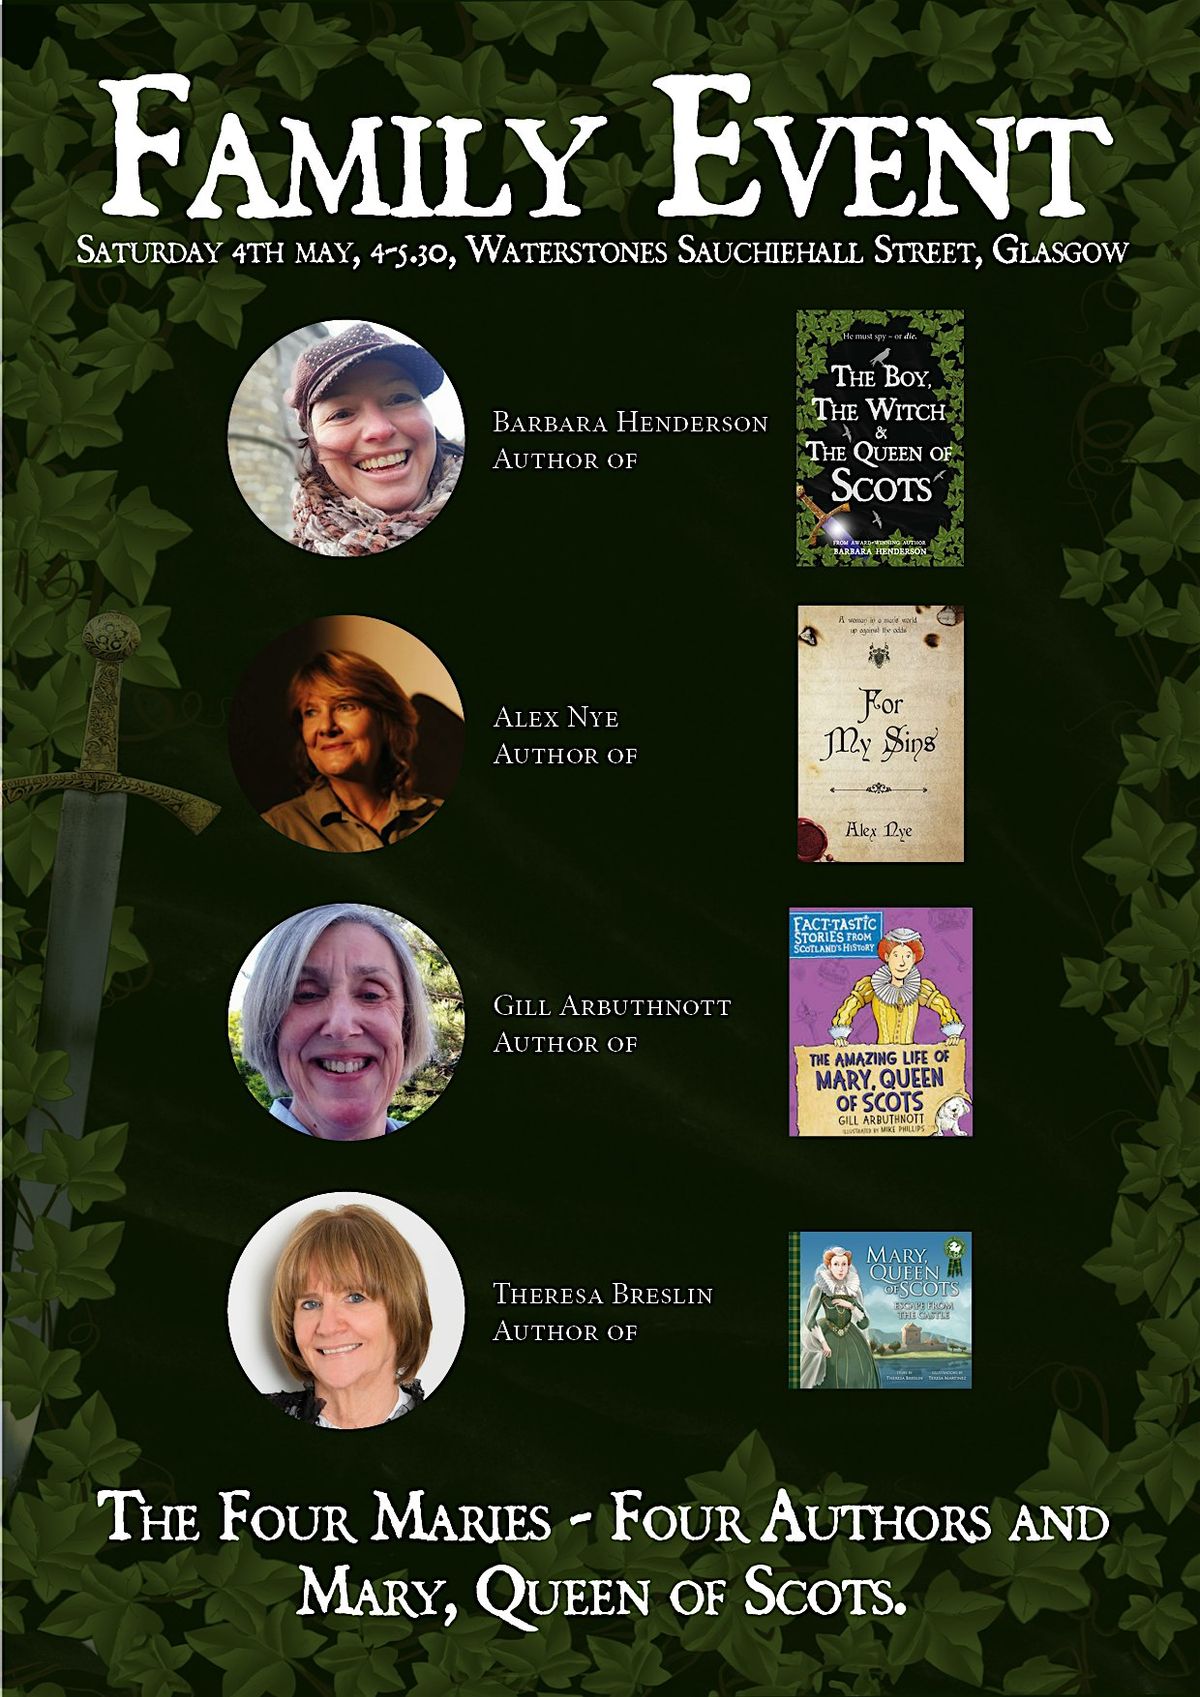 FAMILY EVENT: Four authors and Mary Queen of Scots!